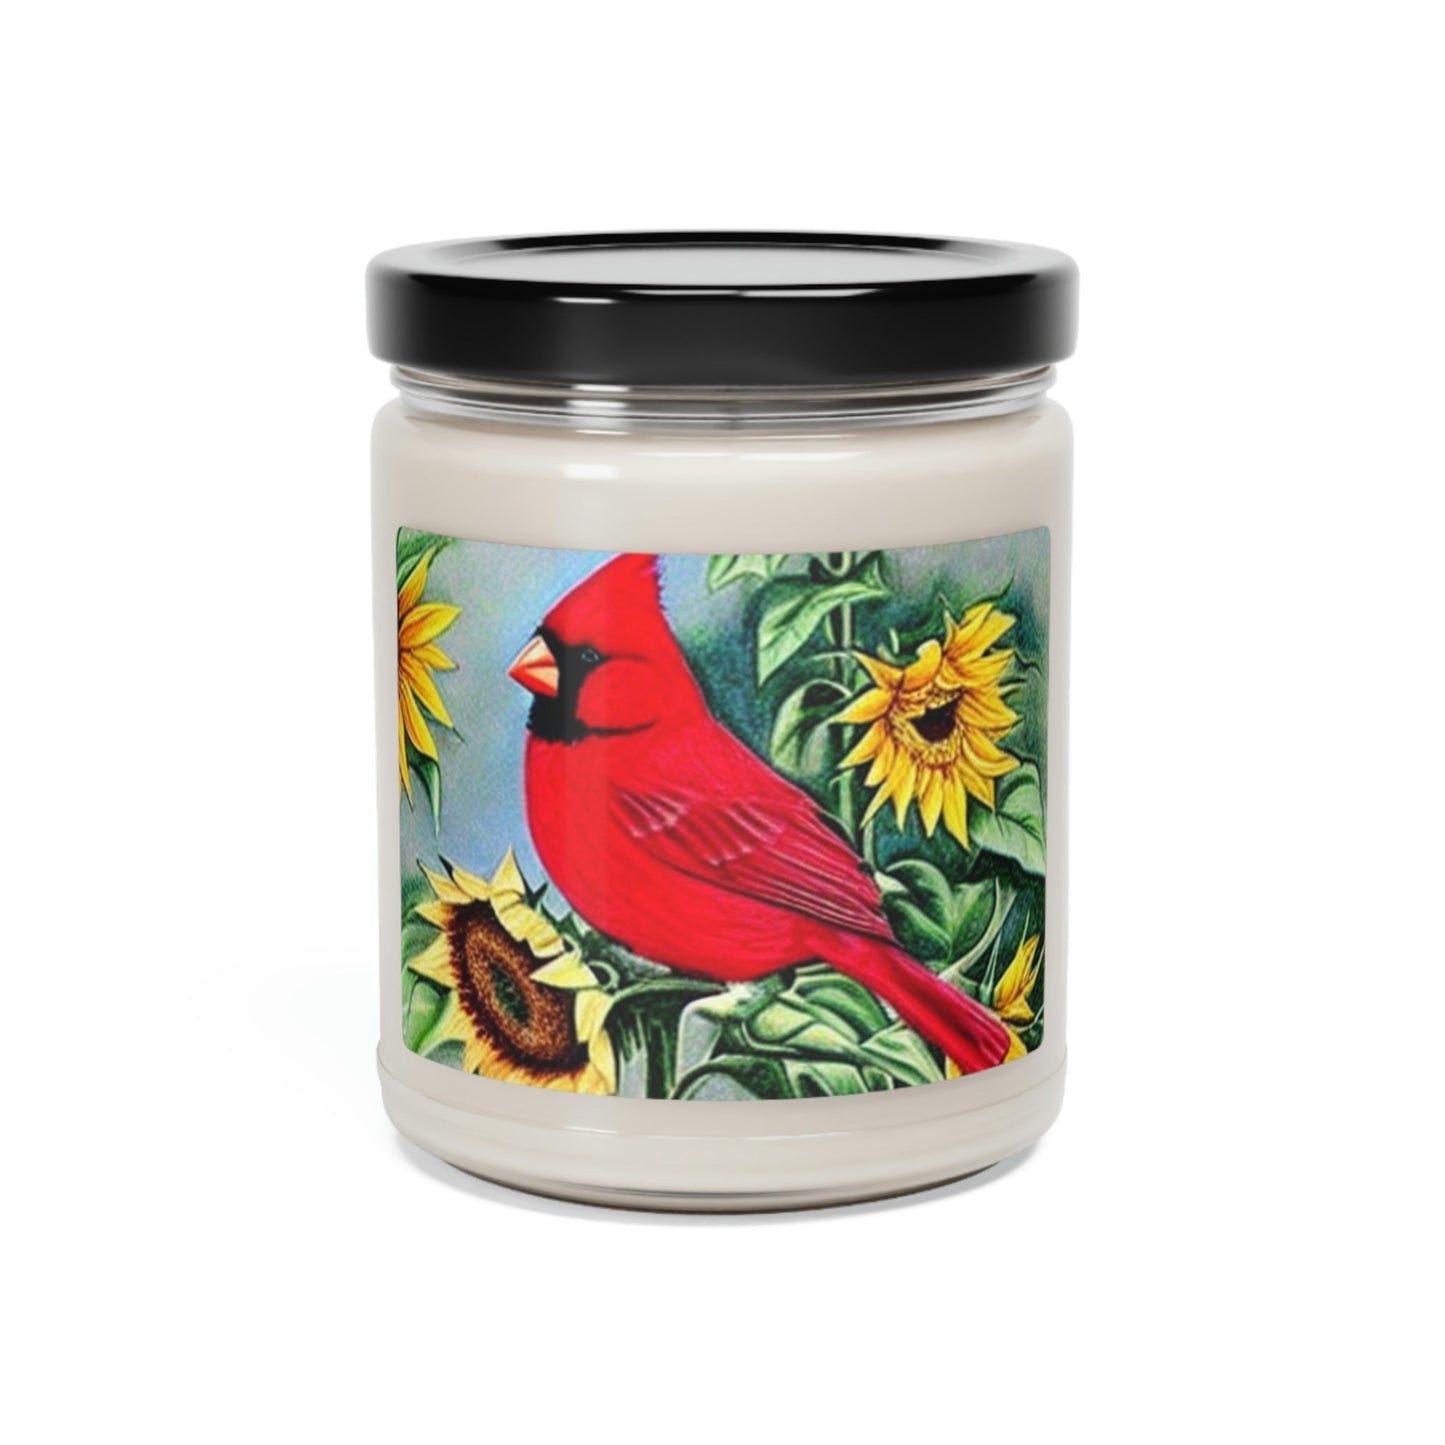 Cardinal & Sunflowers Scented Soy Candle - 9oz